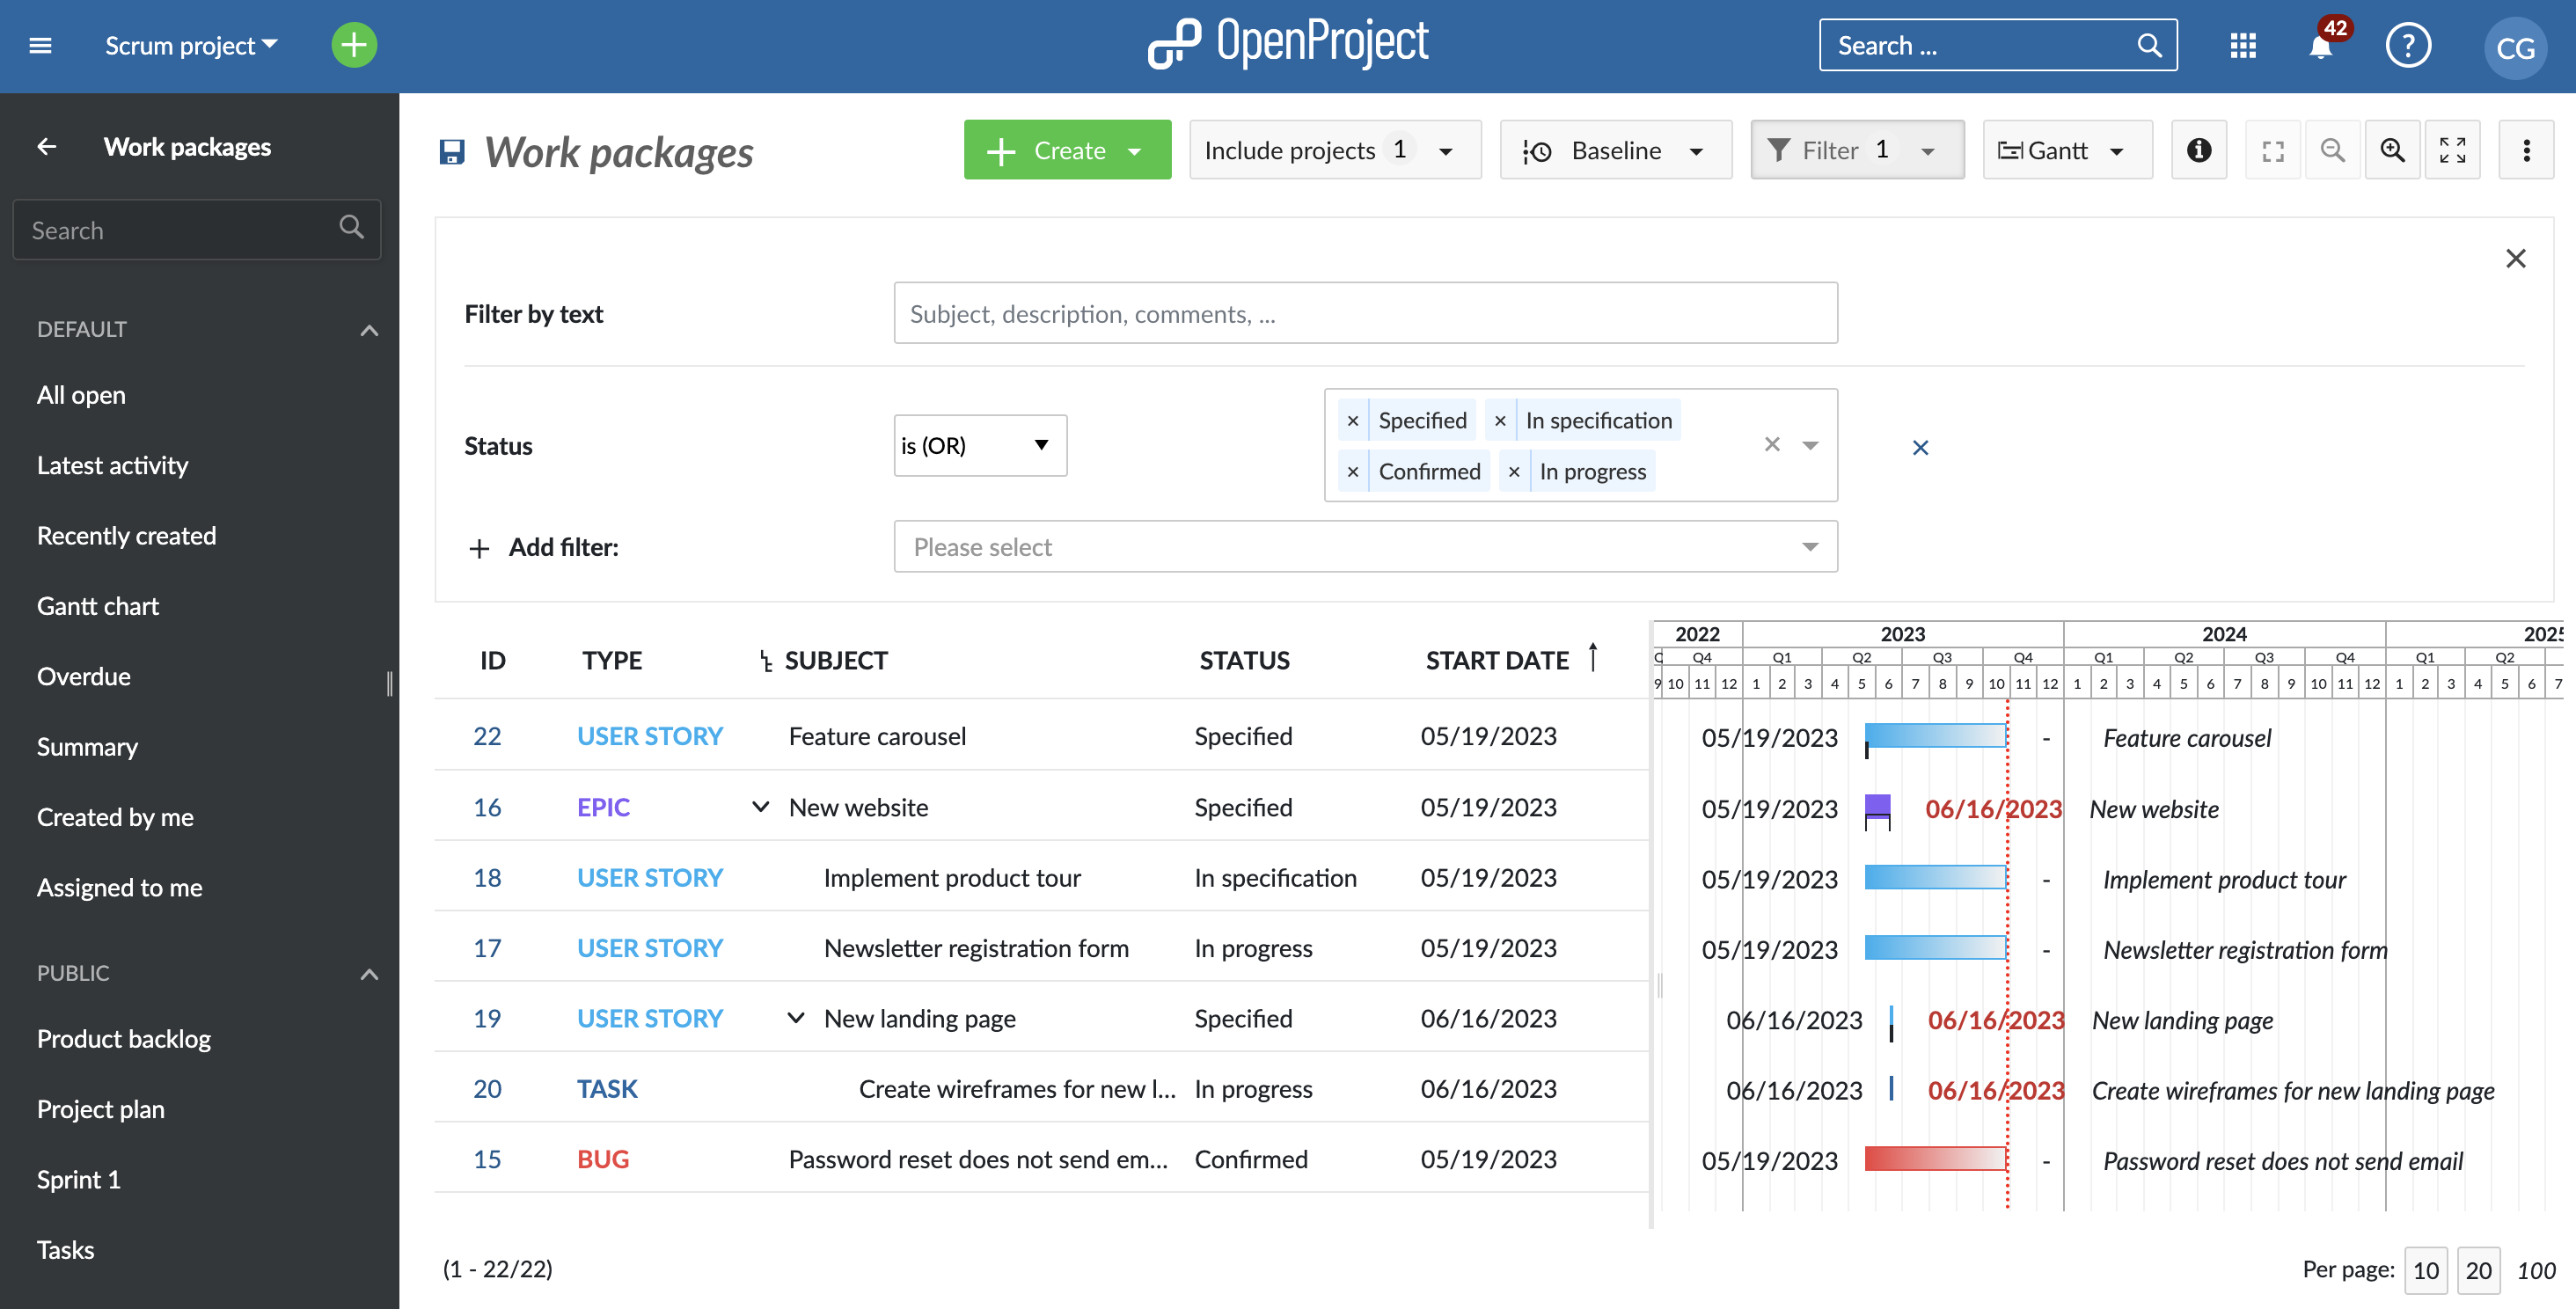 OpenProject - the open source project management software